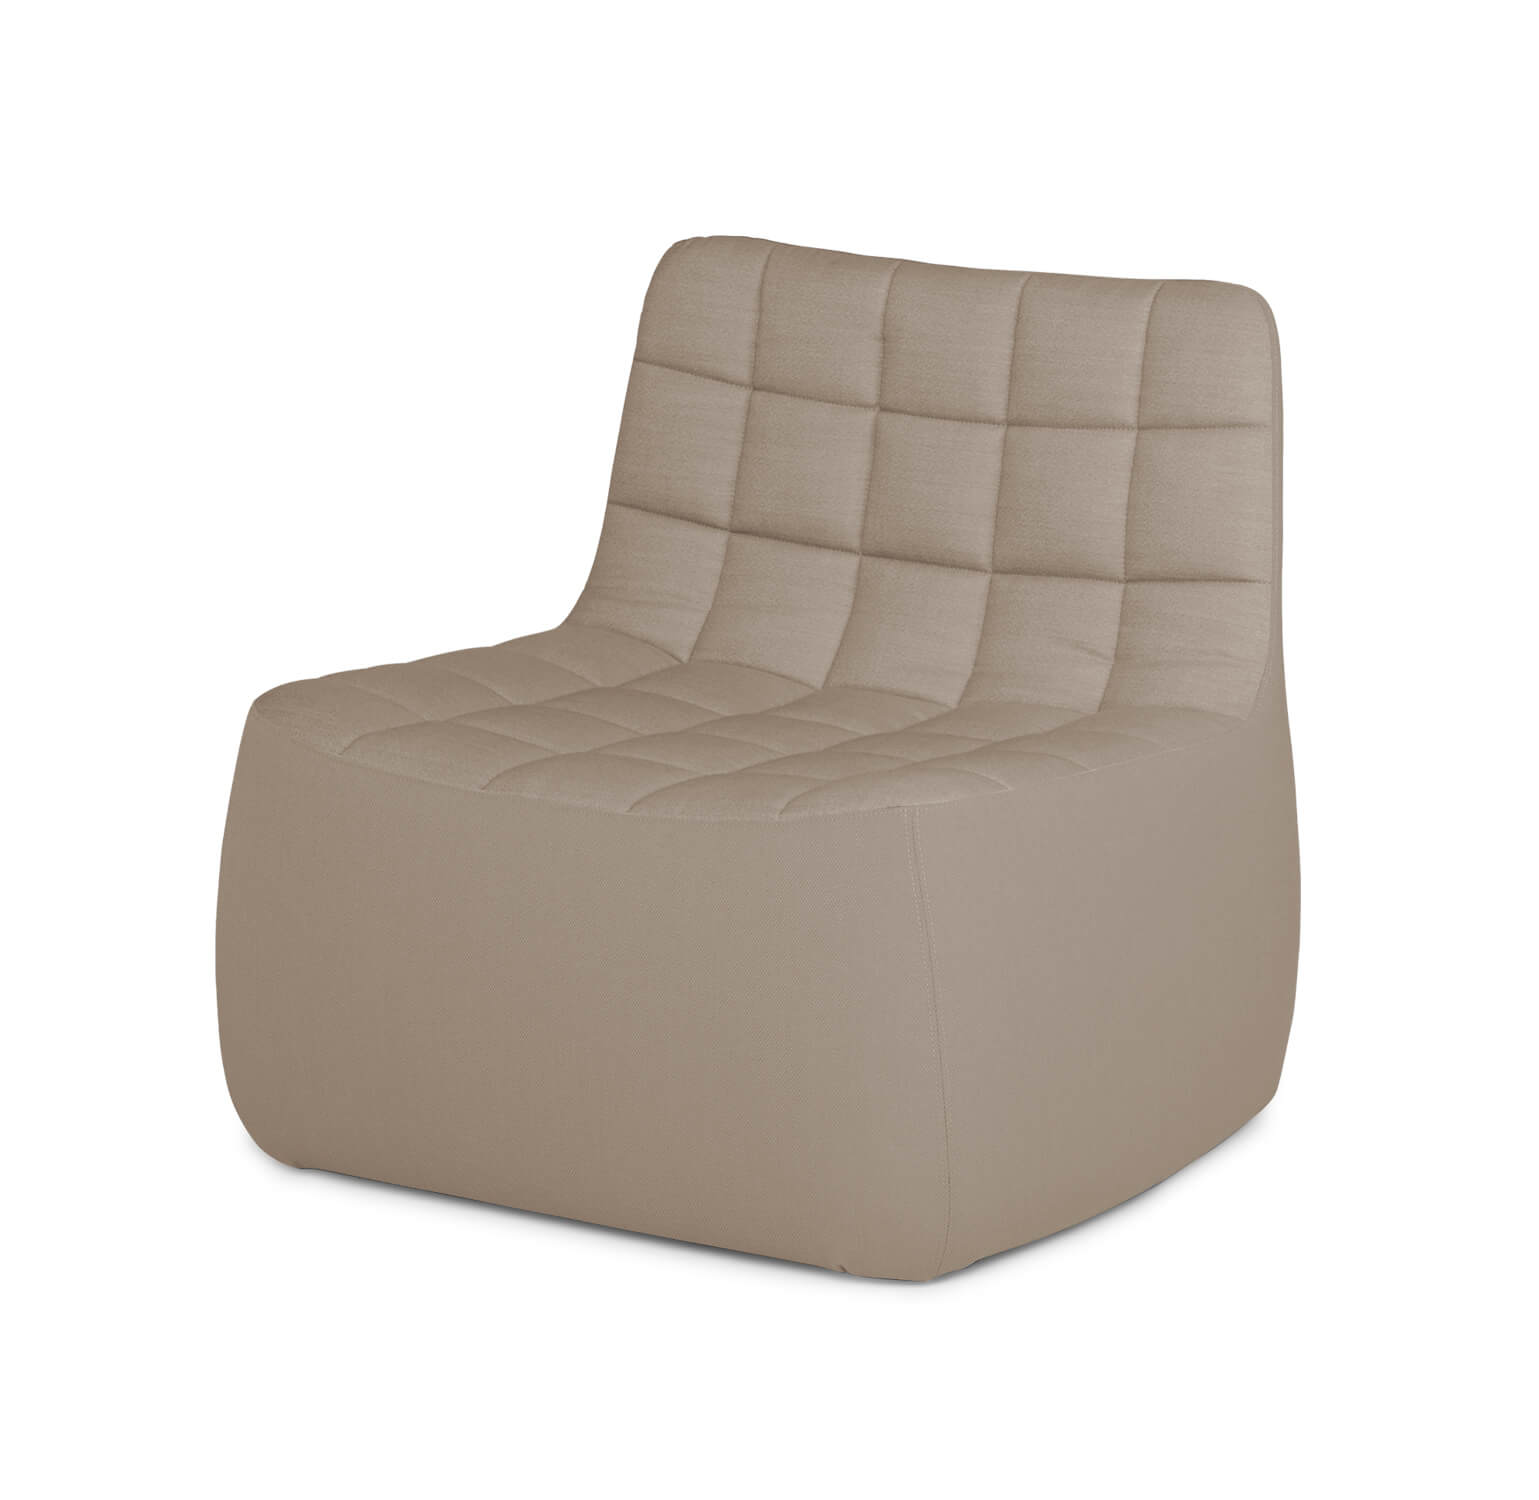 Yam Lounge Chair, brown leather (Ultra Brandy)